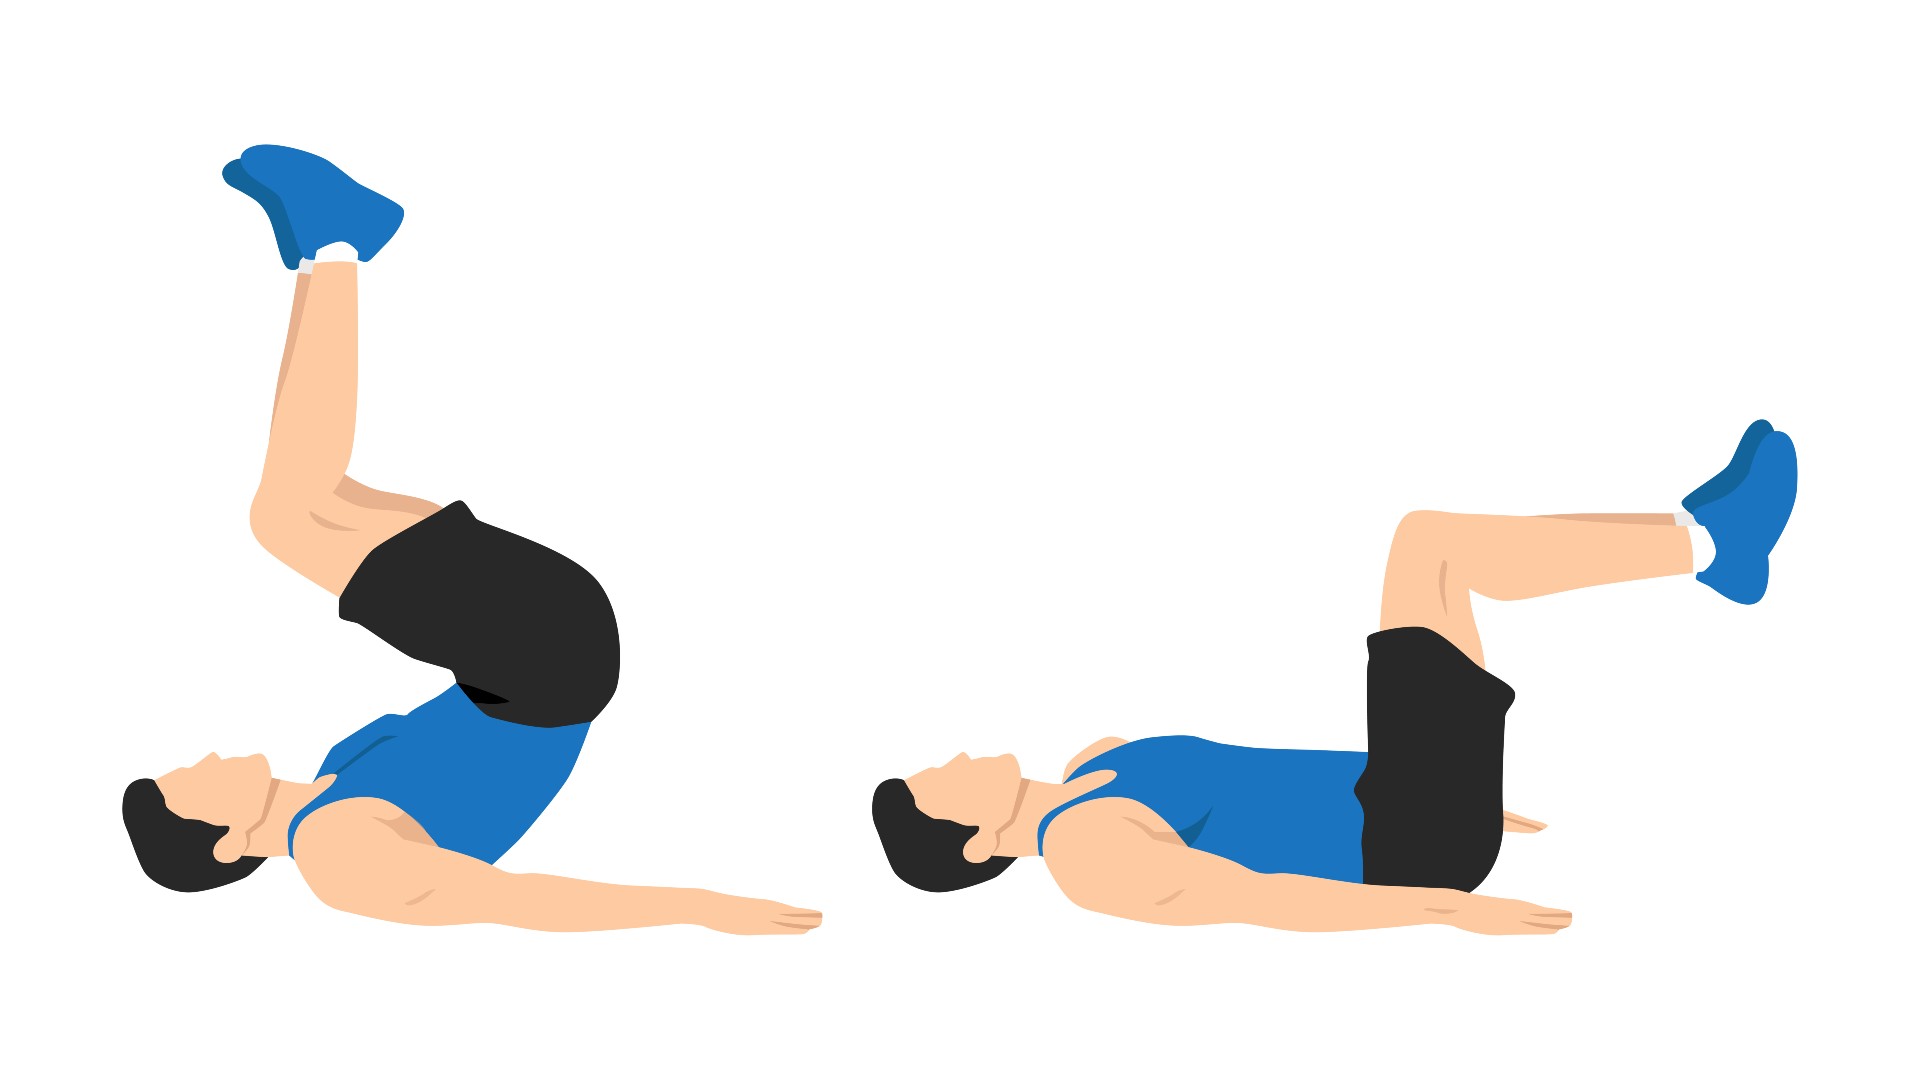 Image of a person doing a reverse crunch on their back with their knees bent toward the chest